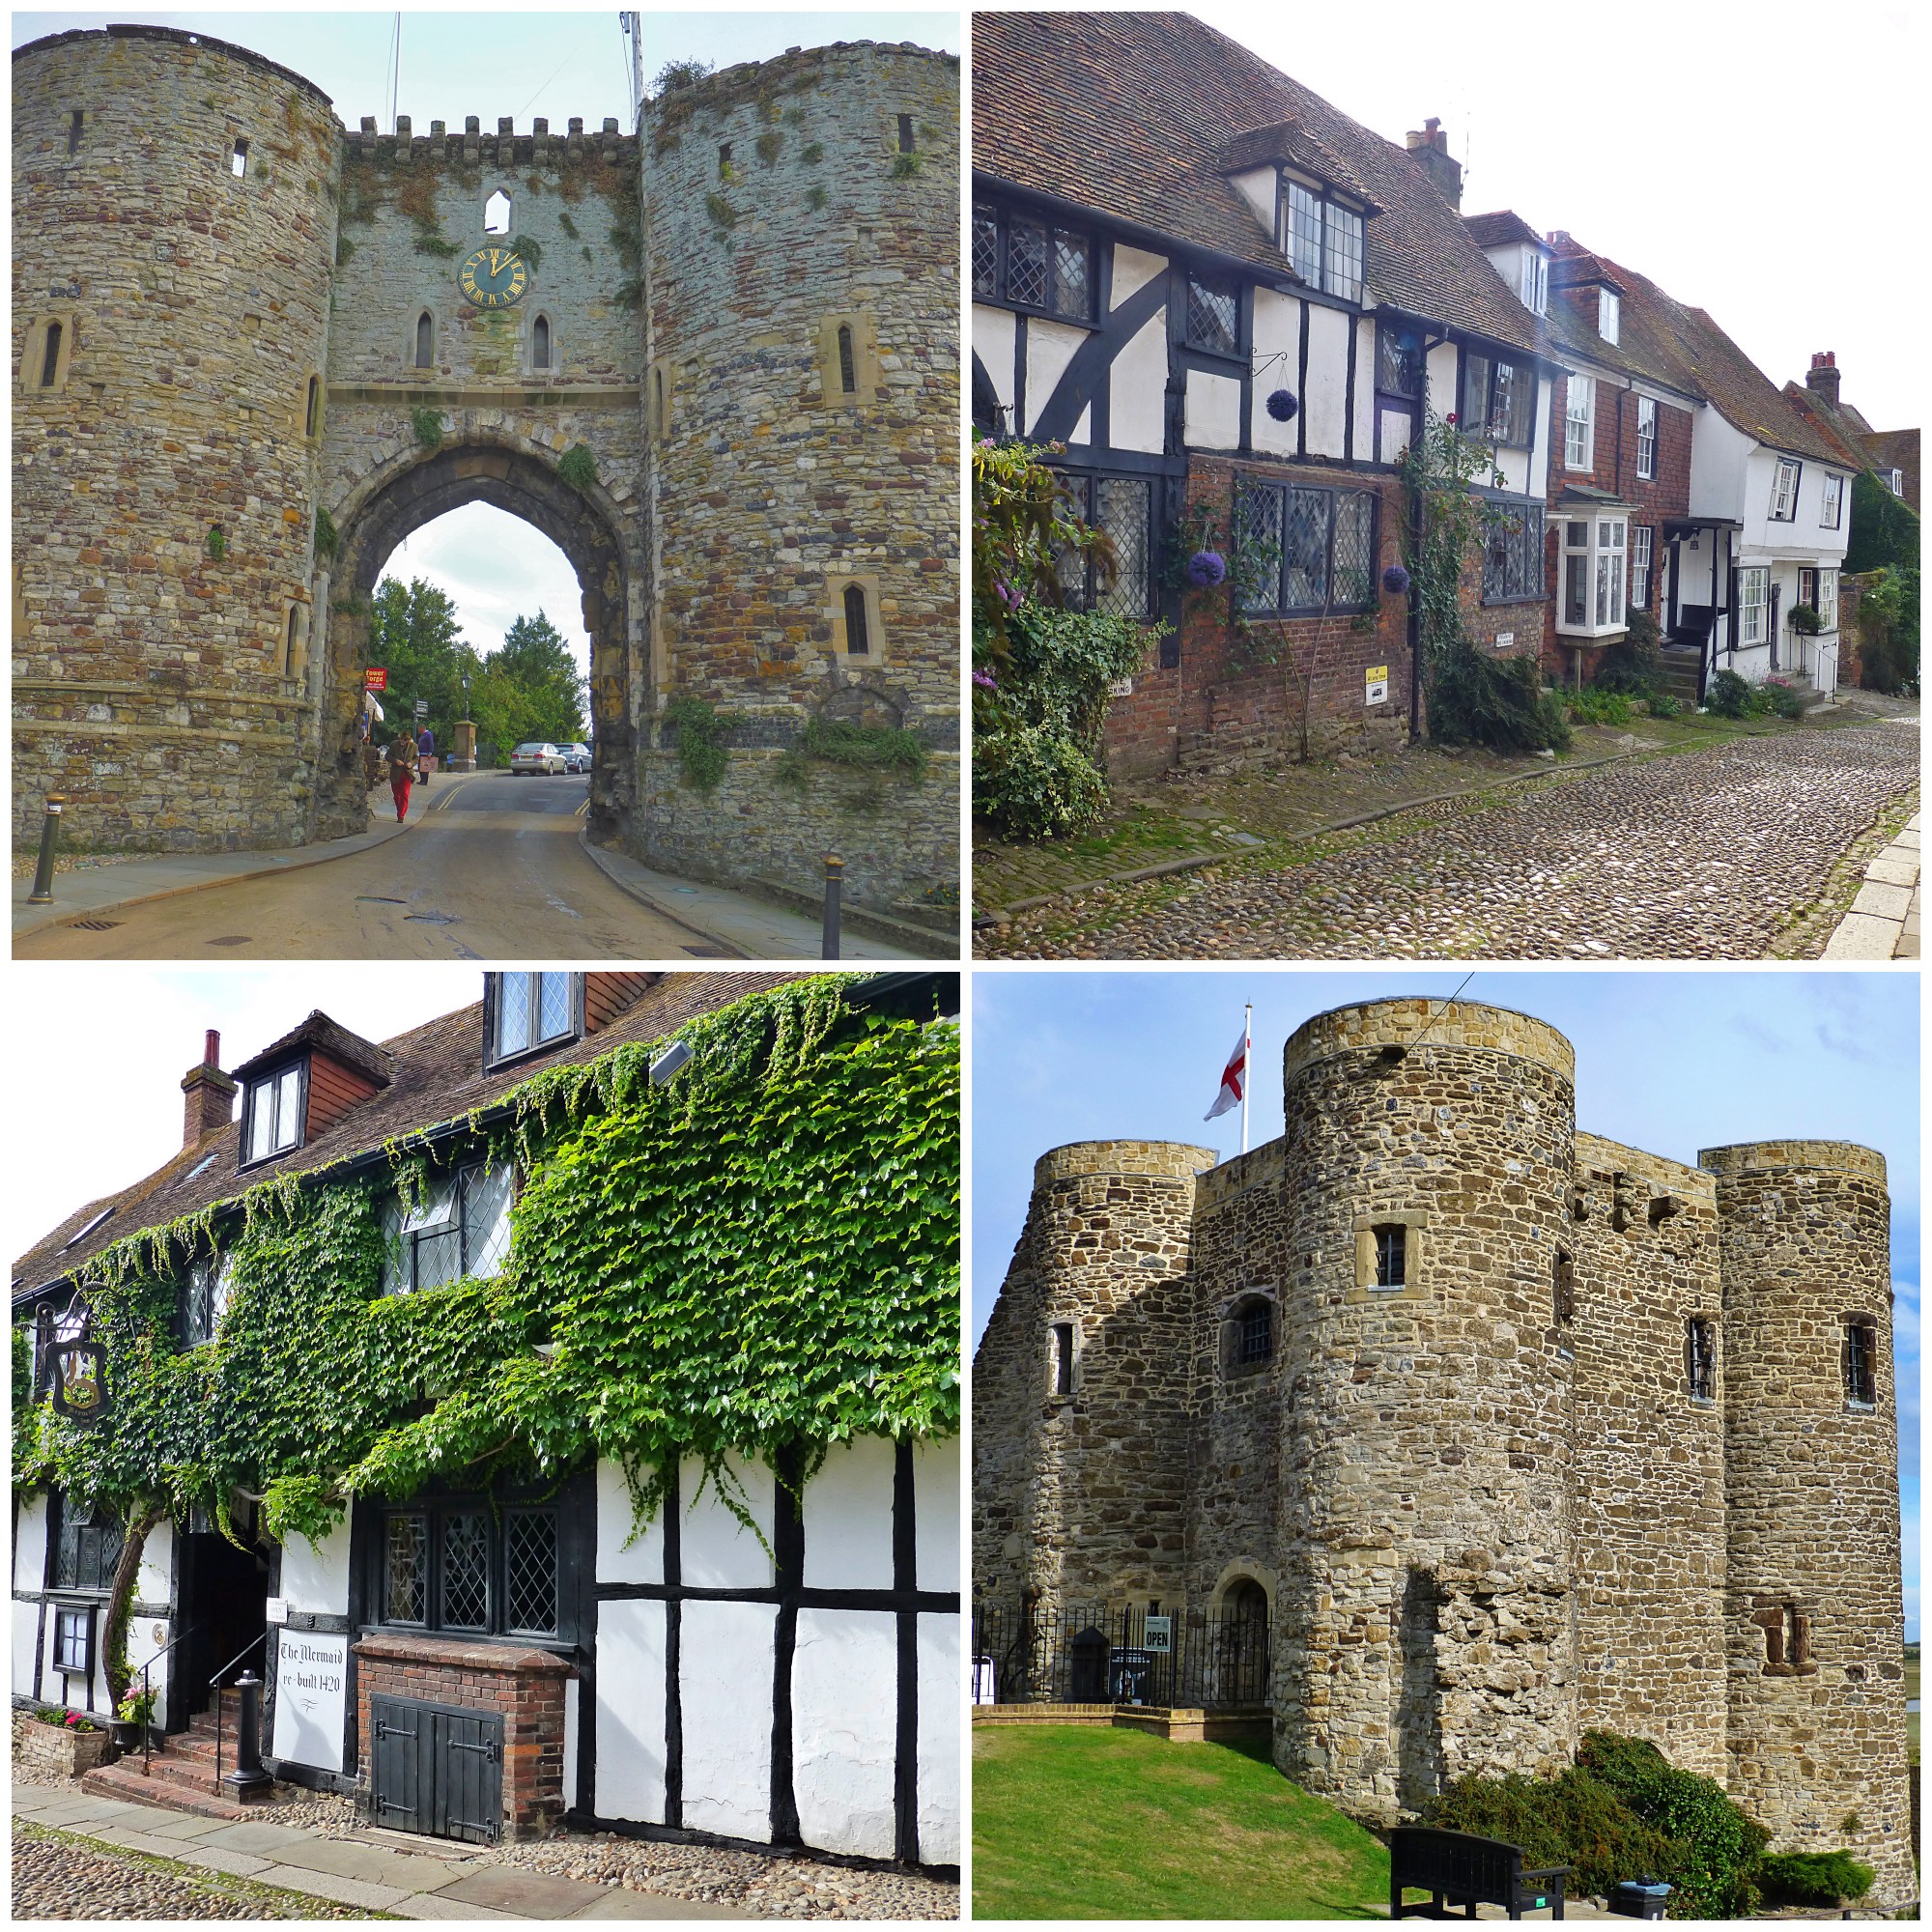 The Beautiful Town of Rye in Sussex is Close to the Camber Sands Holiday Park